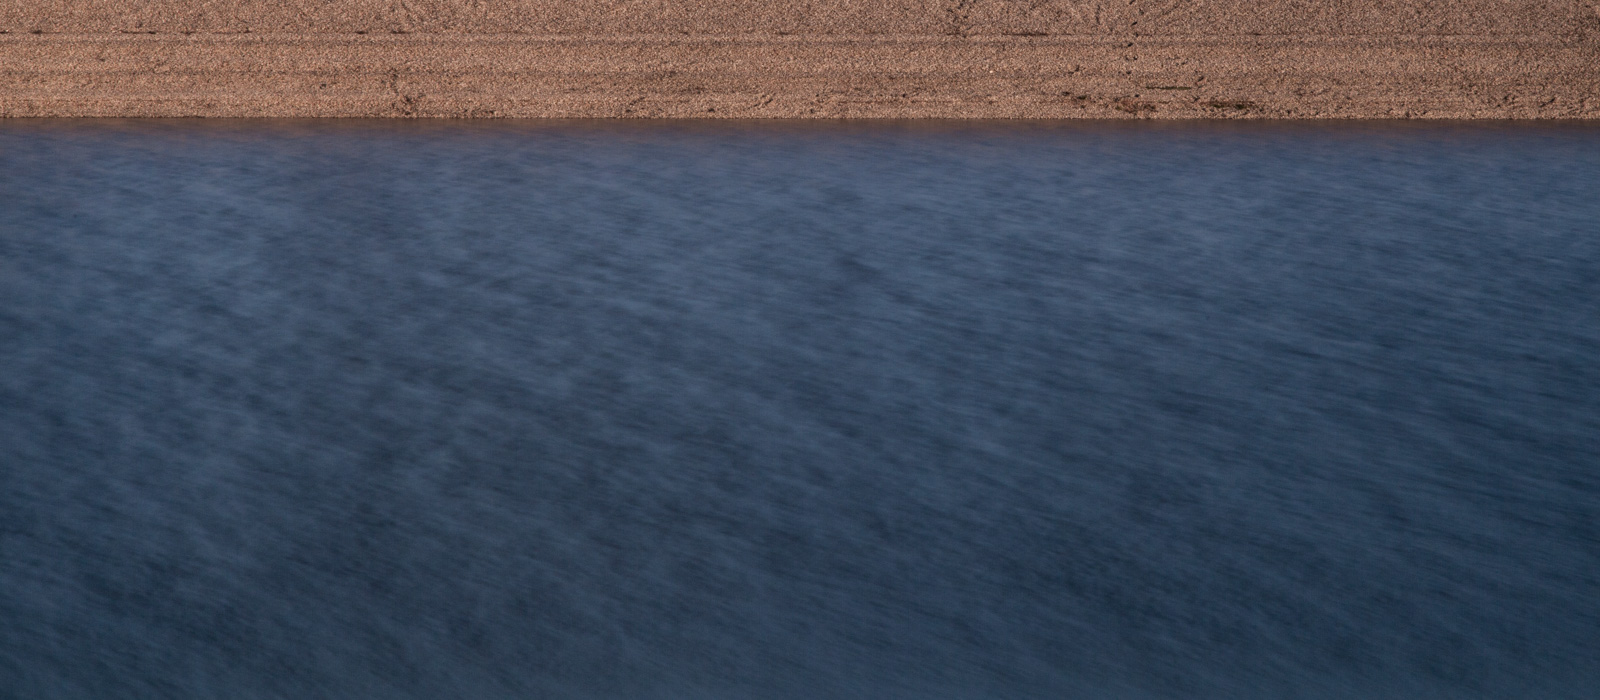 minimalistic horizontal image, seeming two-dimensional, showing a pebble beach and water with a smooth gradient from bright to dark blue and slight blur due to aperture